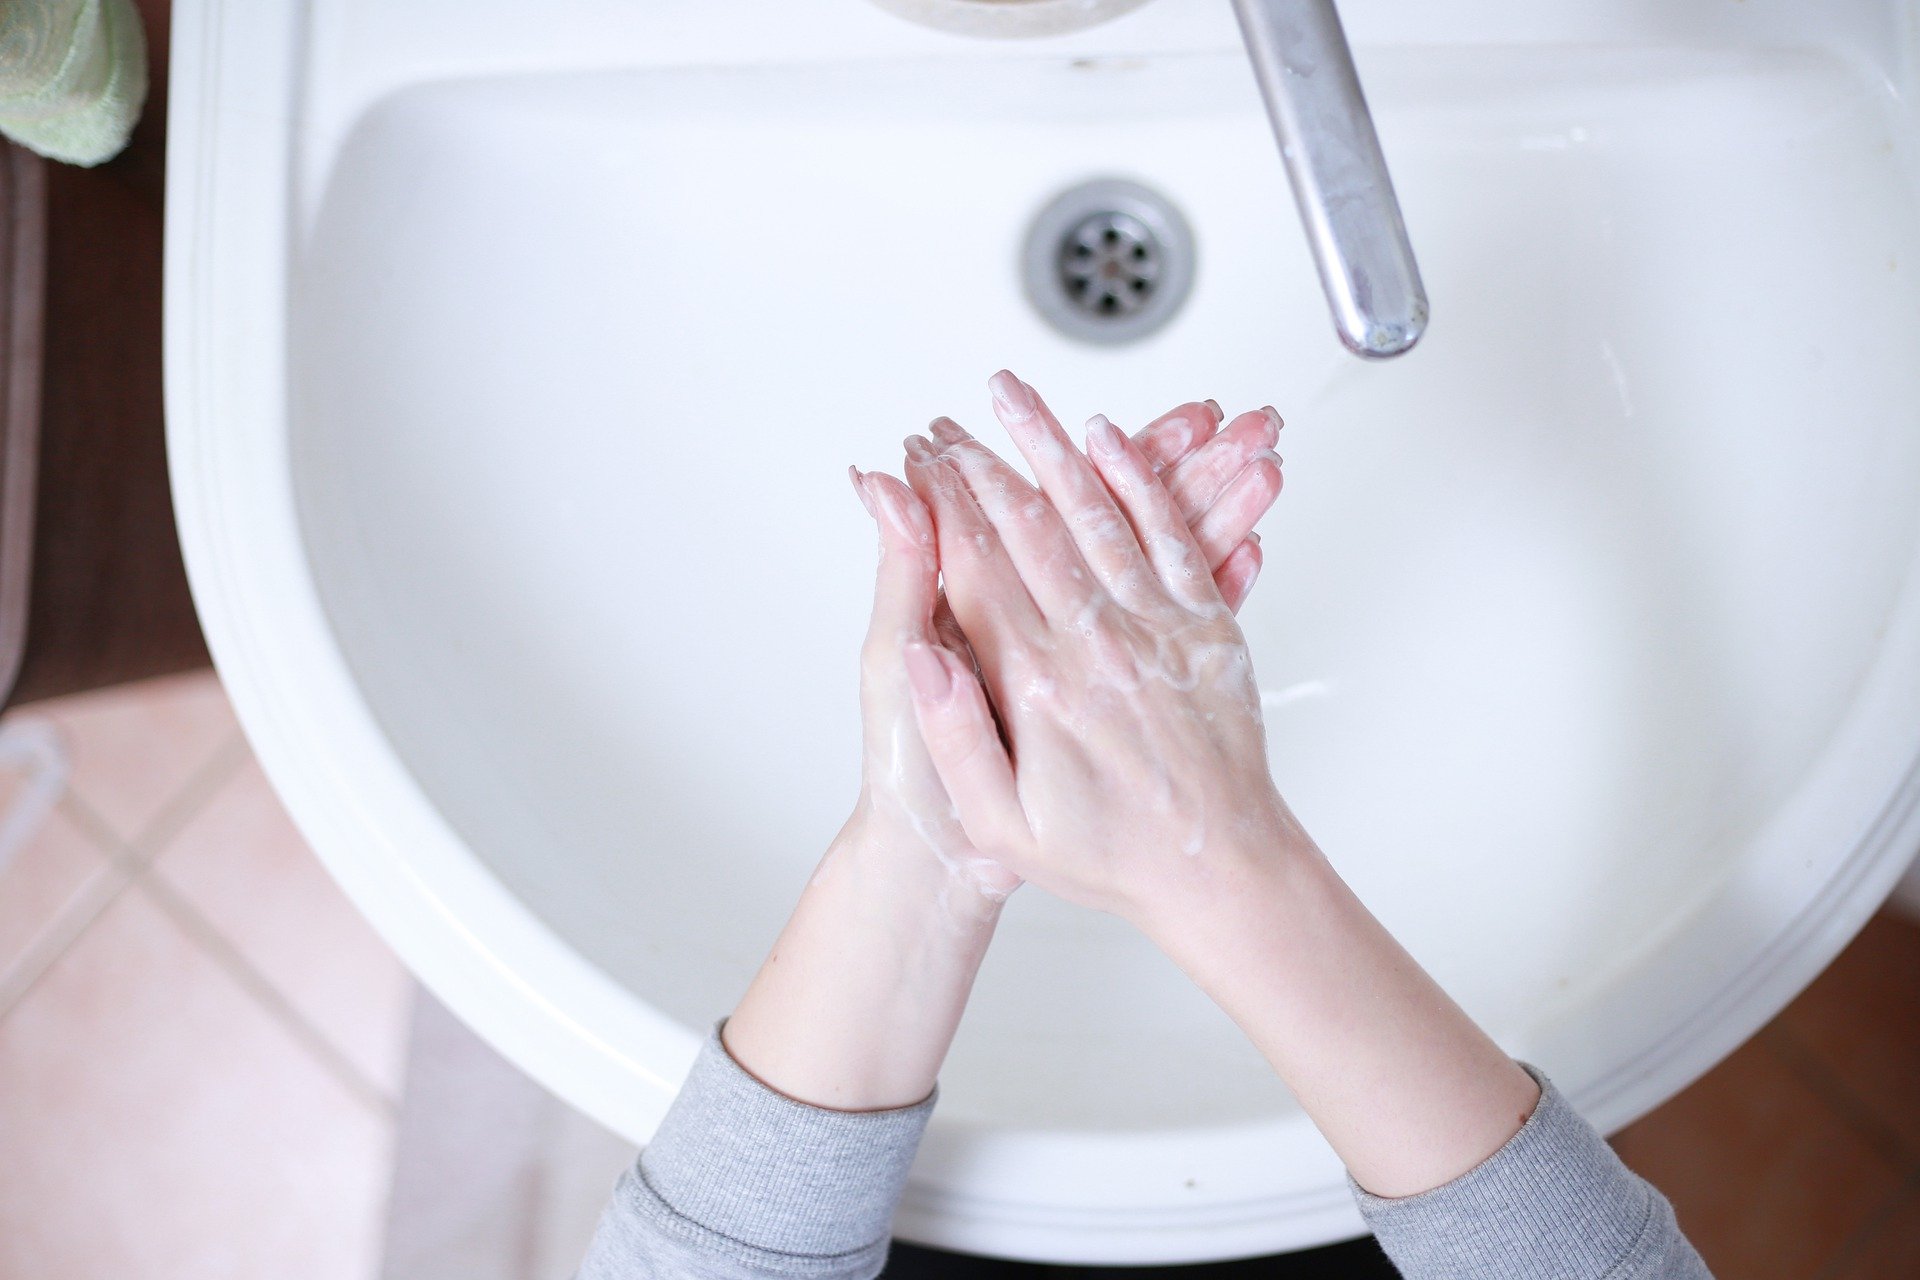 Woman washing her hands at a sink